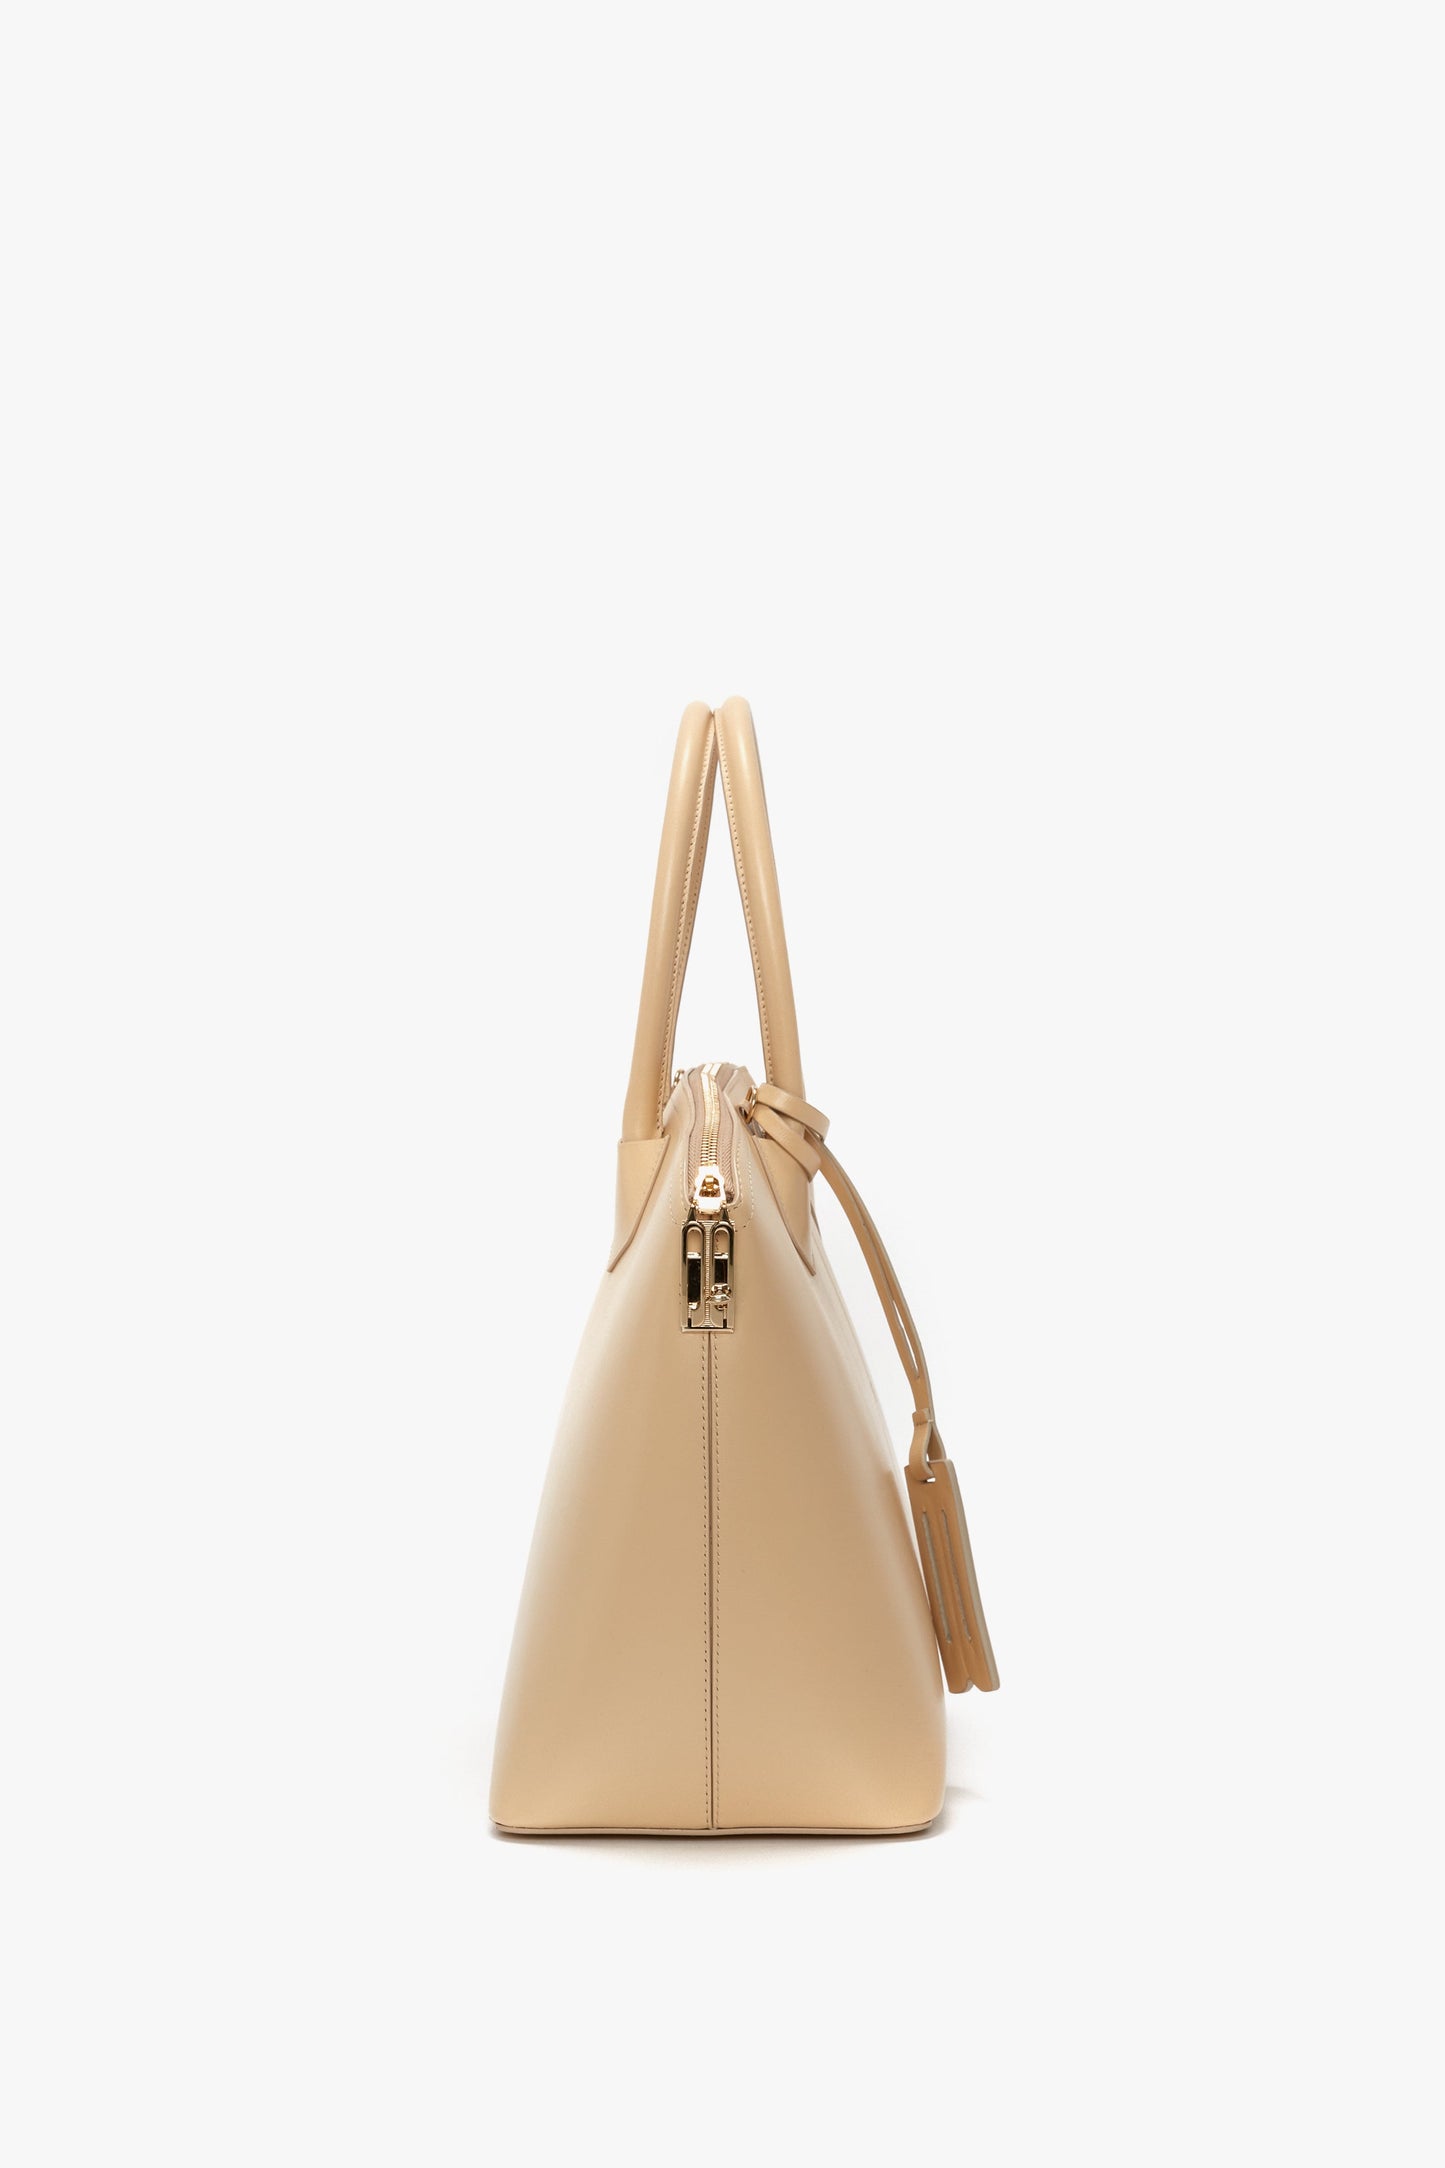 Side profile of the Victoria Beckham Victoria Bag In Sesame Leather featuring beige leather panels, dual handles, a top zipper, and a keychain tassel on a white background.